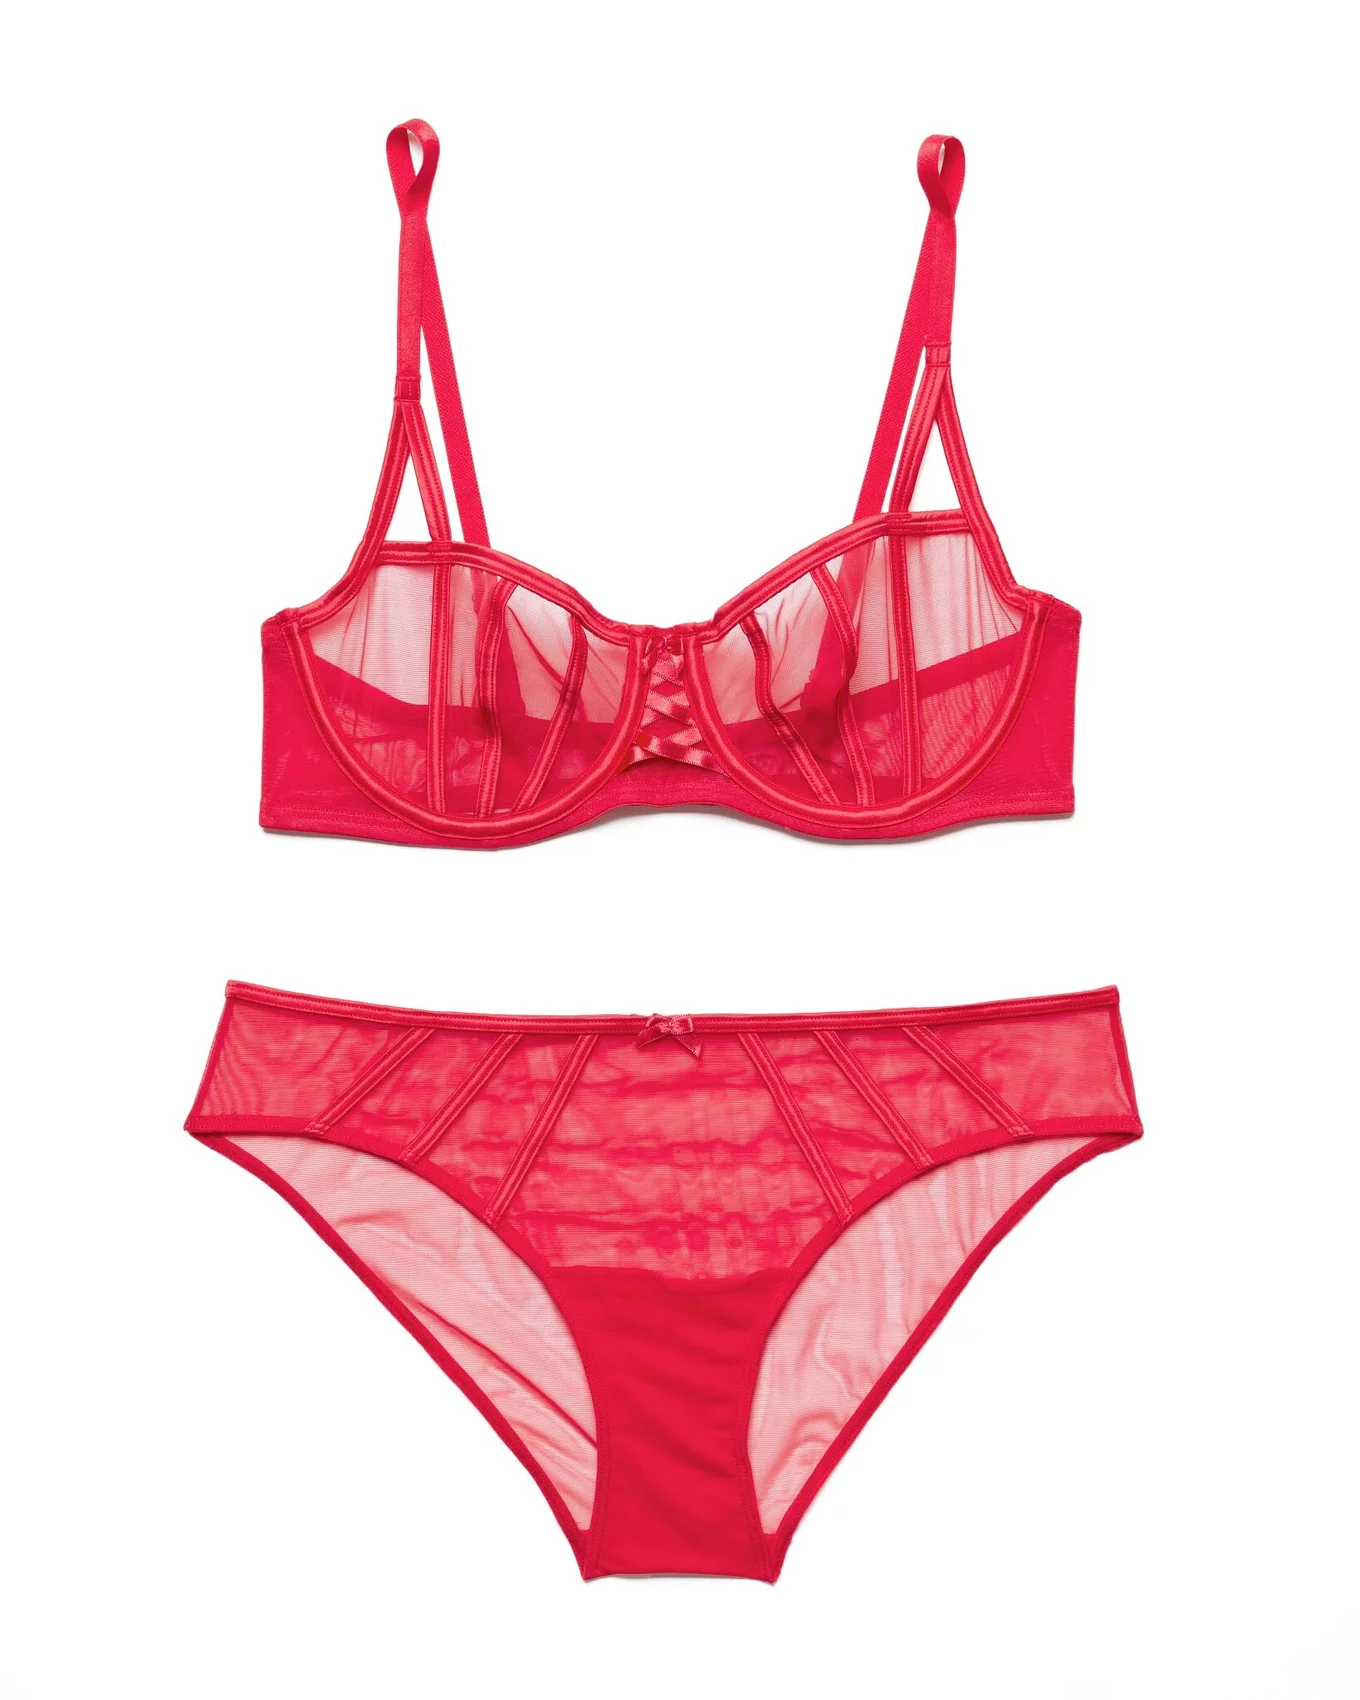 Track No Show Unlined Balconette Bra - Red - 34 - F at Skims